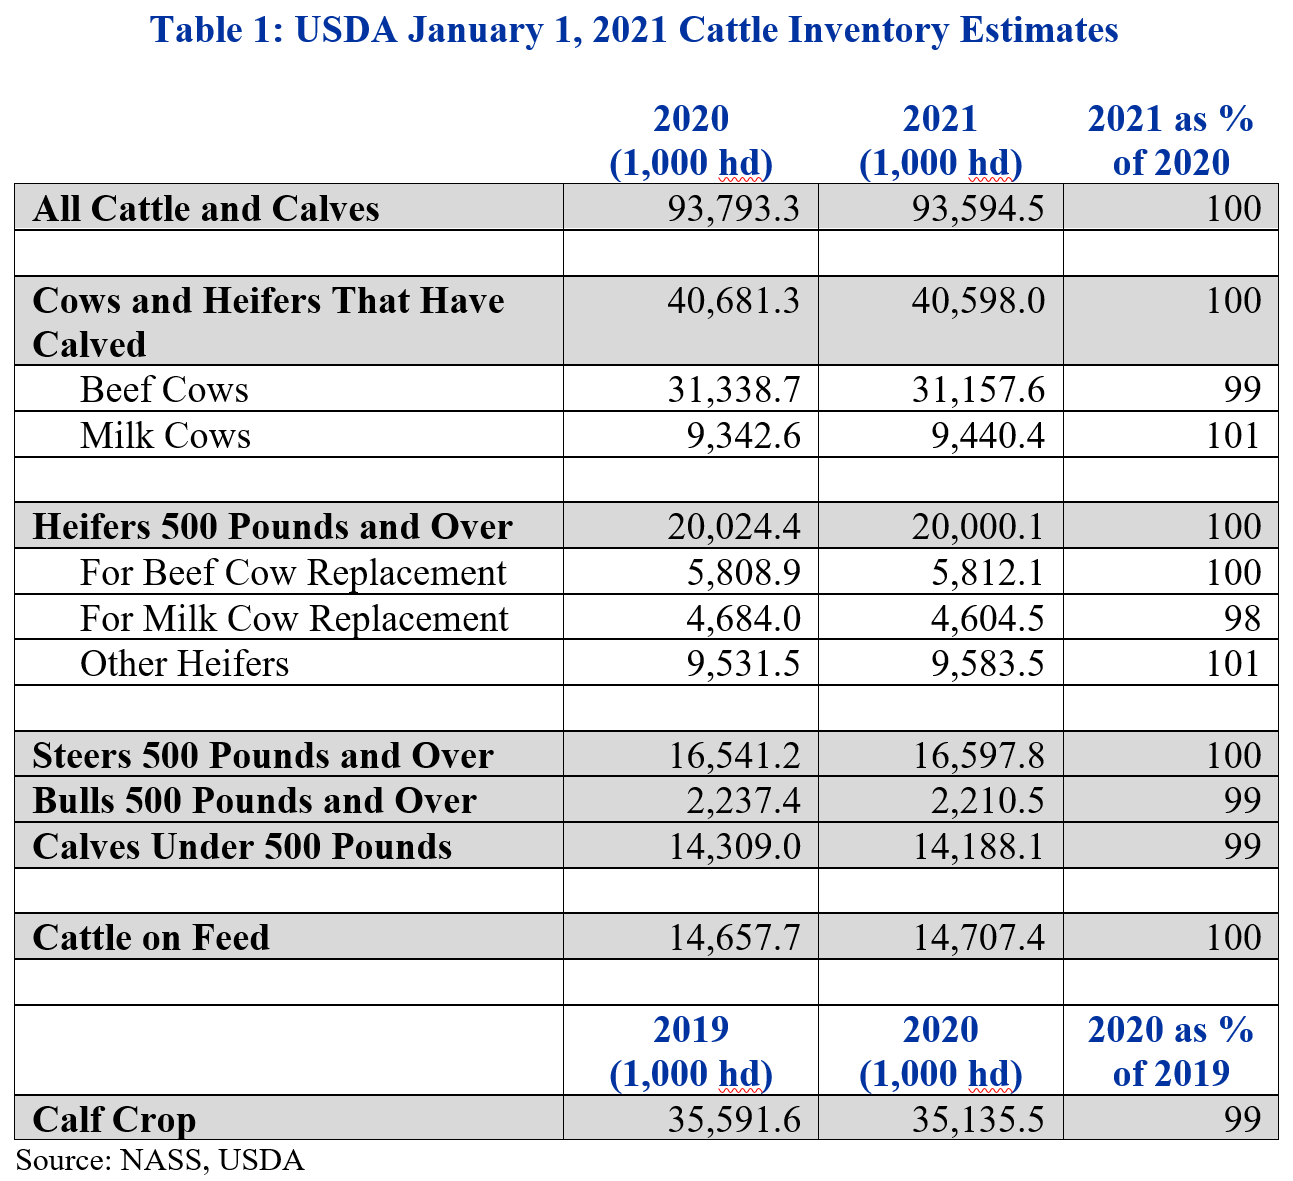 Table of Cattle Inventory Estimates from USDA as of January 1, 2021